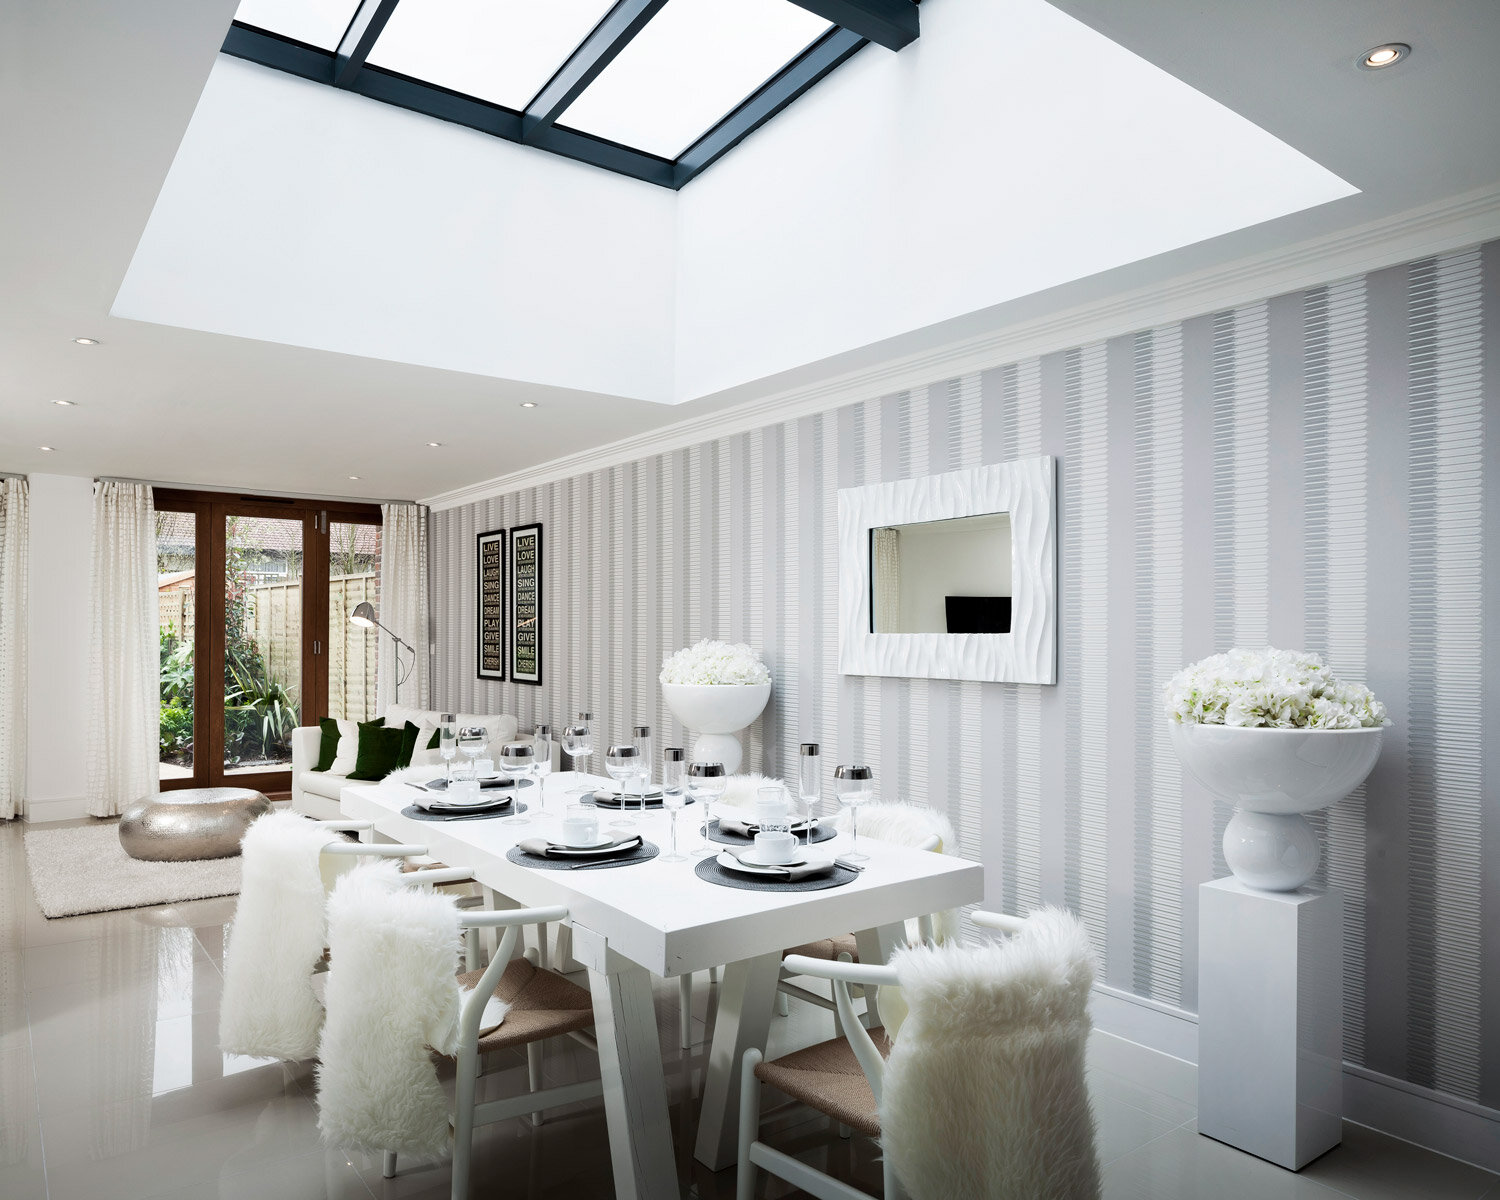 martin-grant-homes-in-south-london-large-dining-room-with-skylight